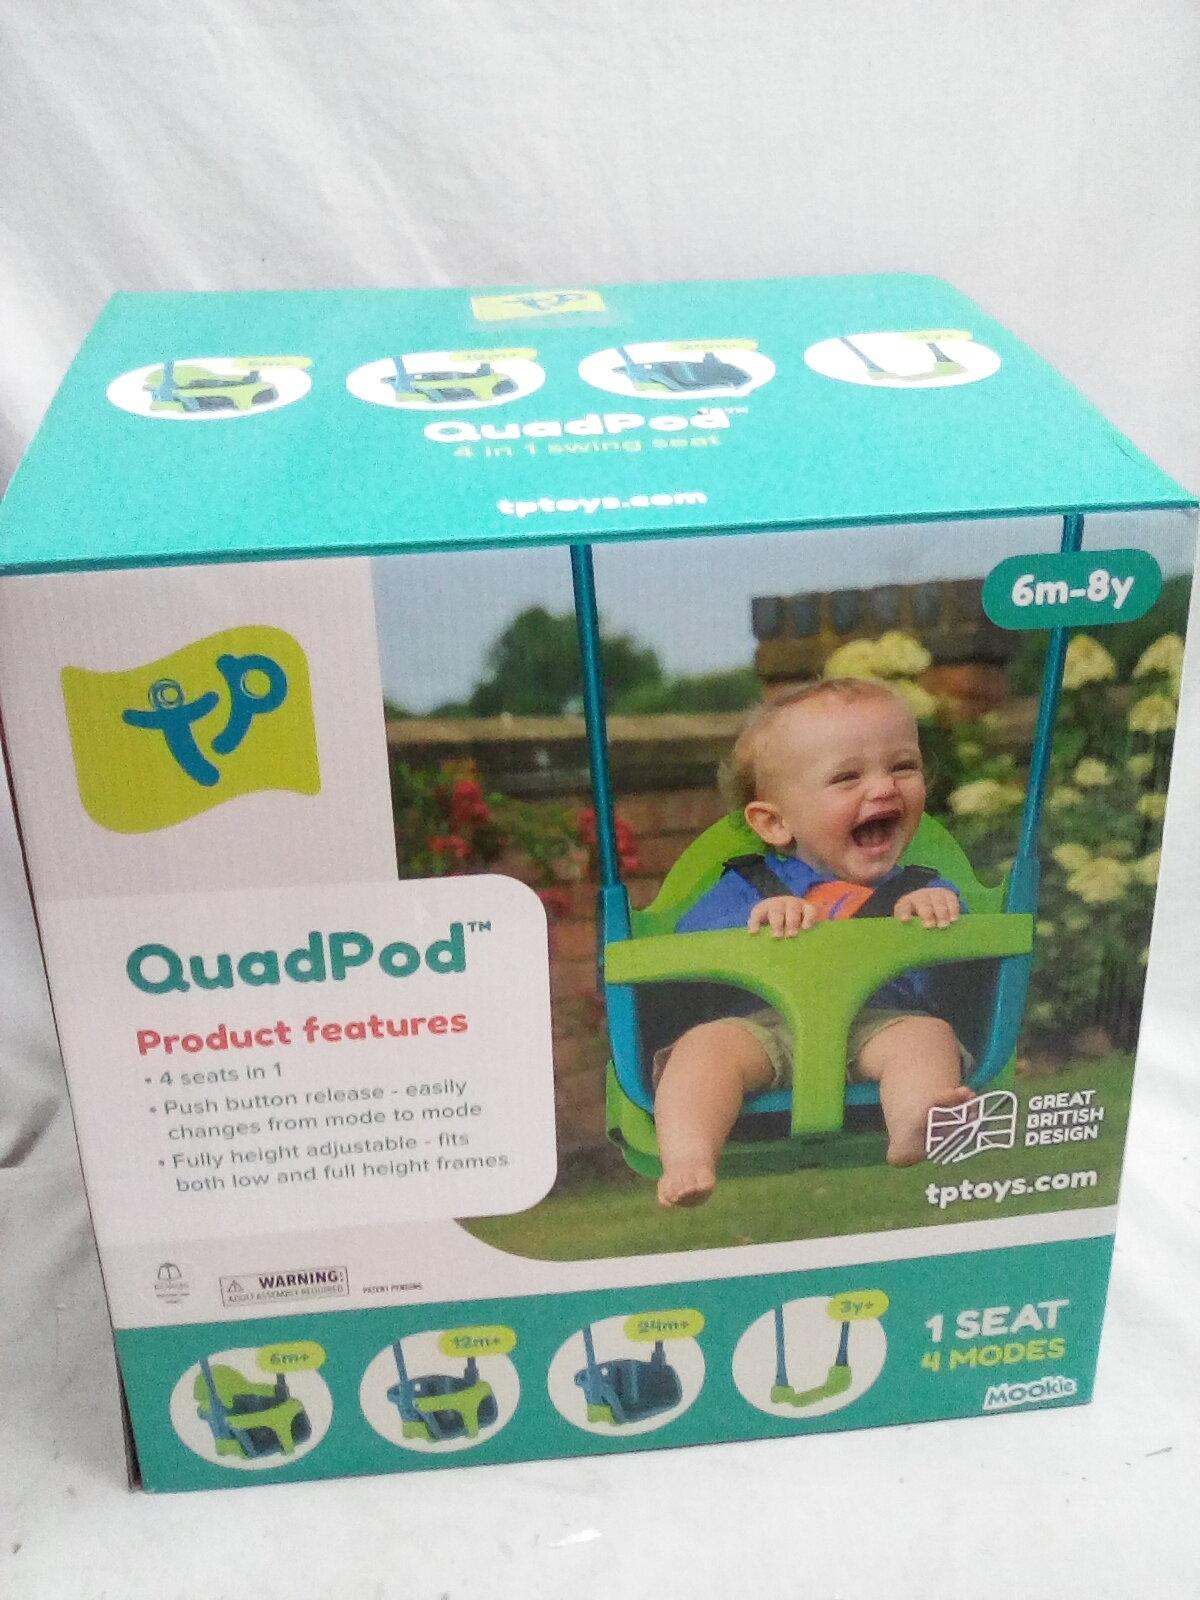 Mookie QuadPod Outdoor Swing for Children Ages 0-3+